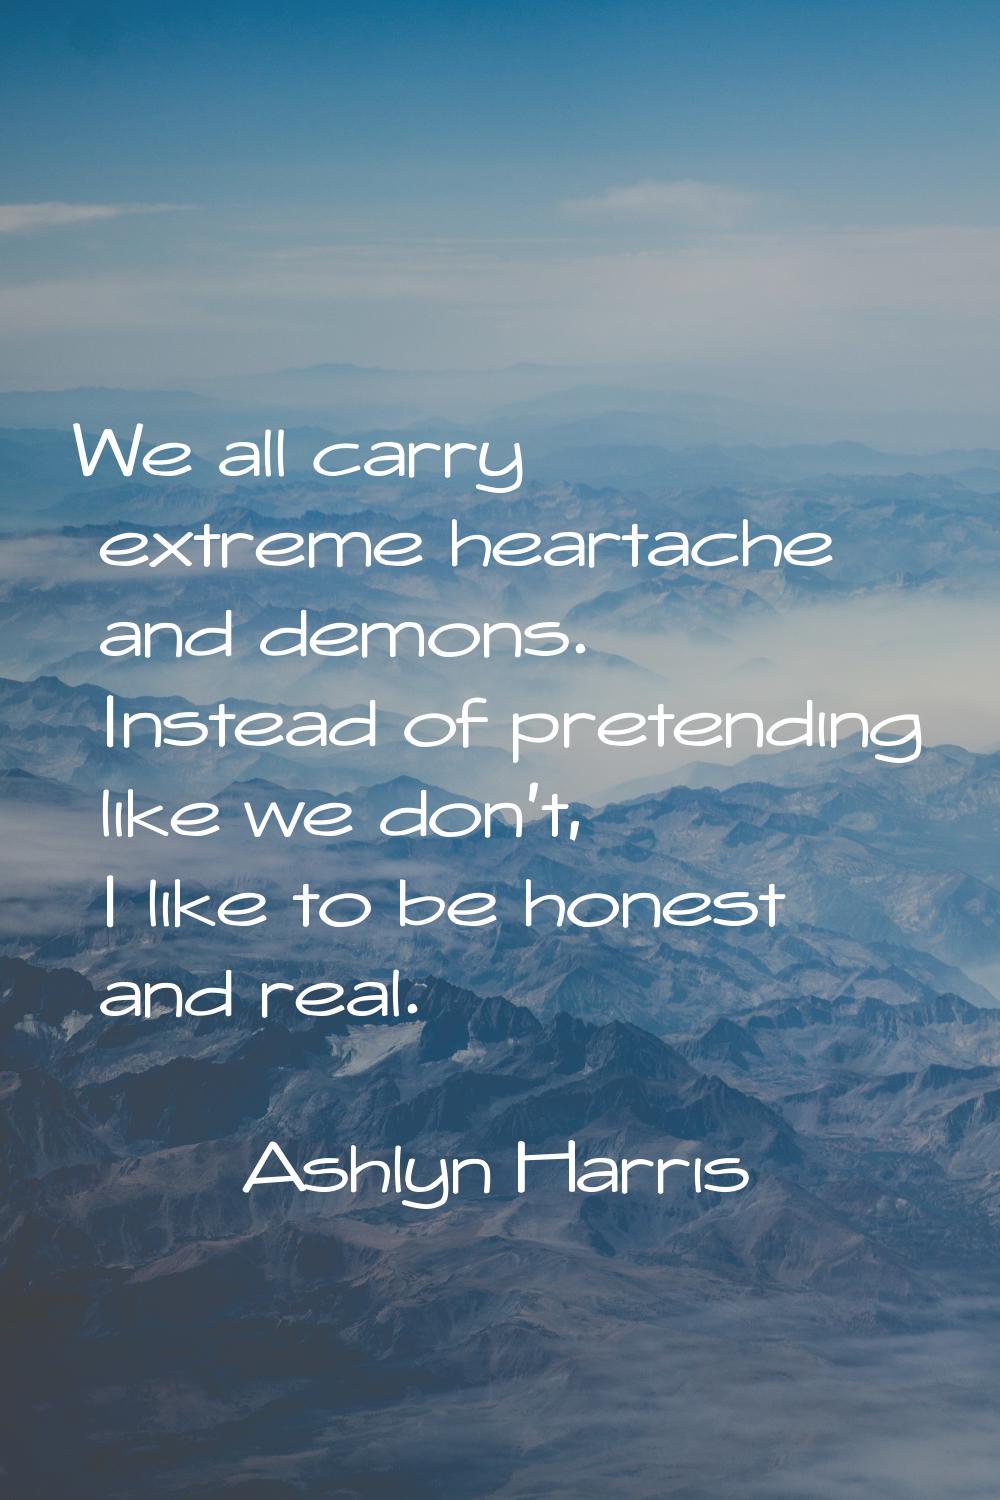 We all carry extreme heartache and demons. Instead of pretending like we don't, I like to be honest